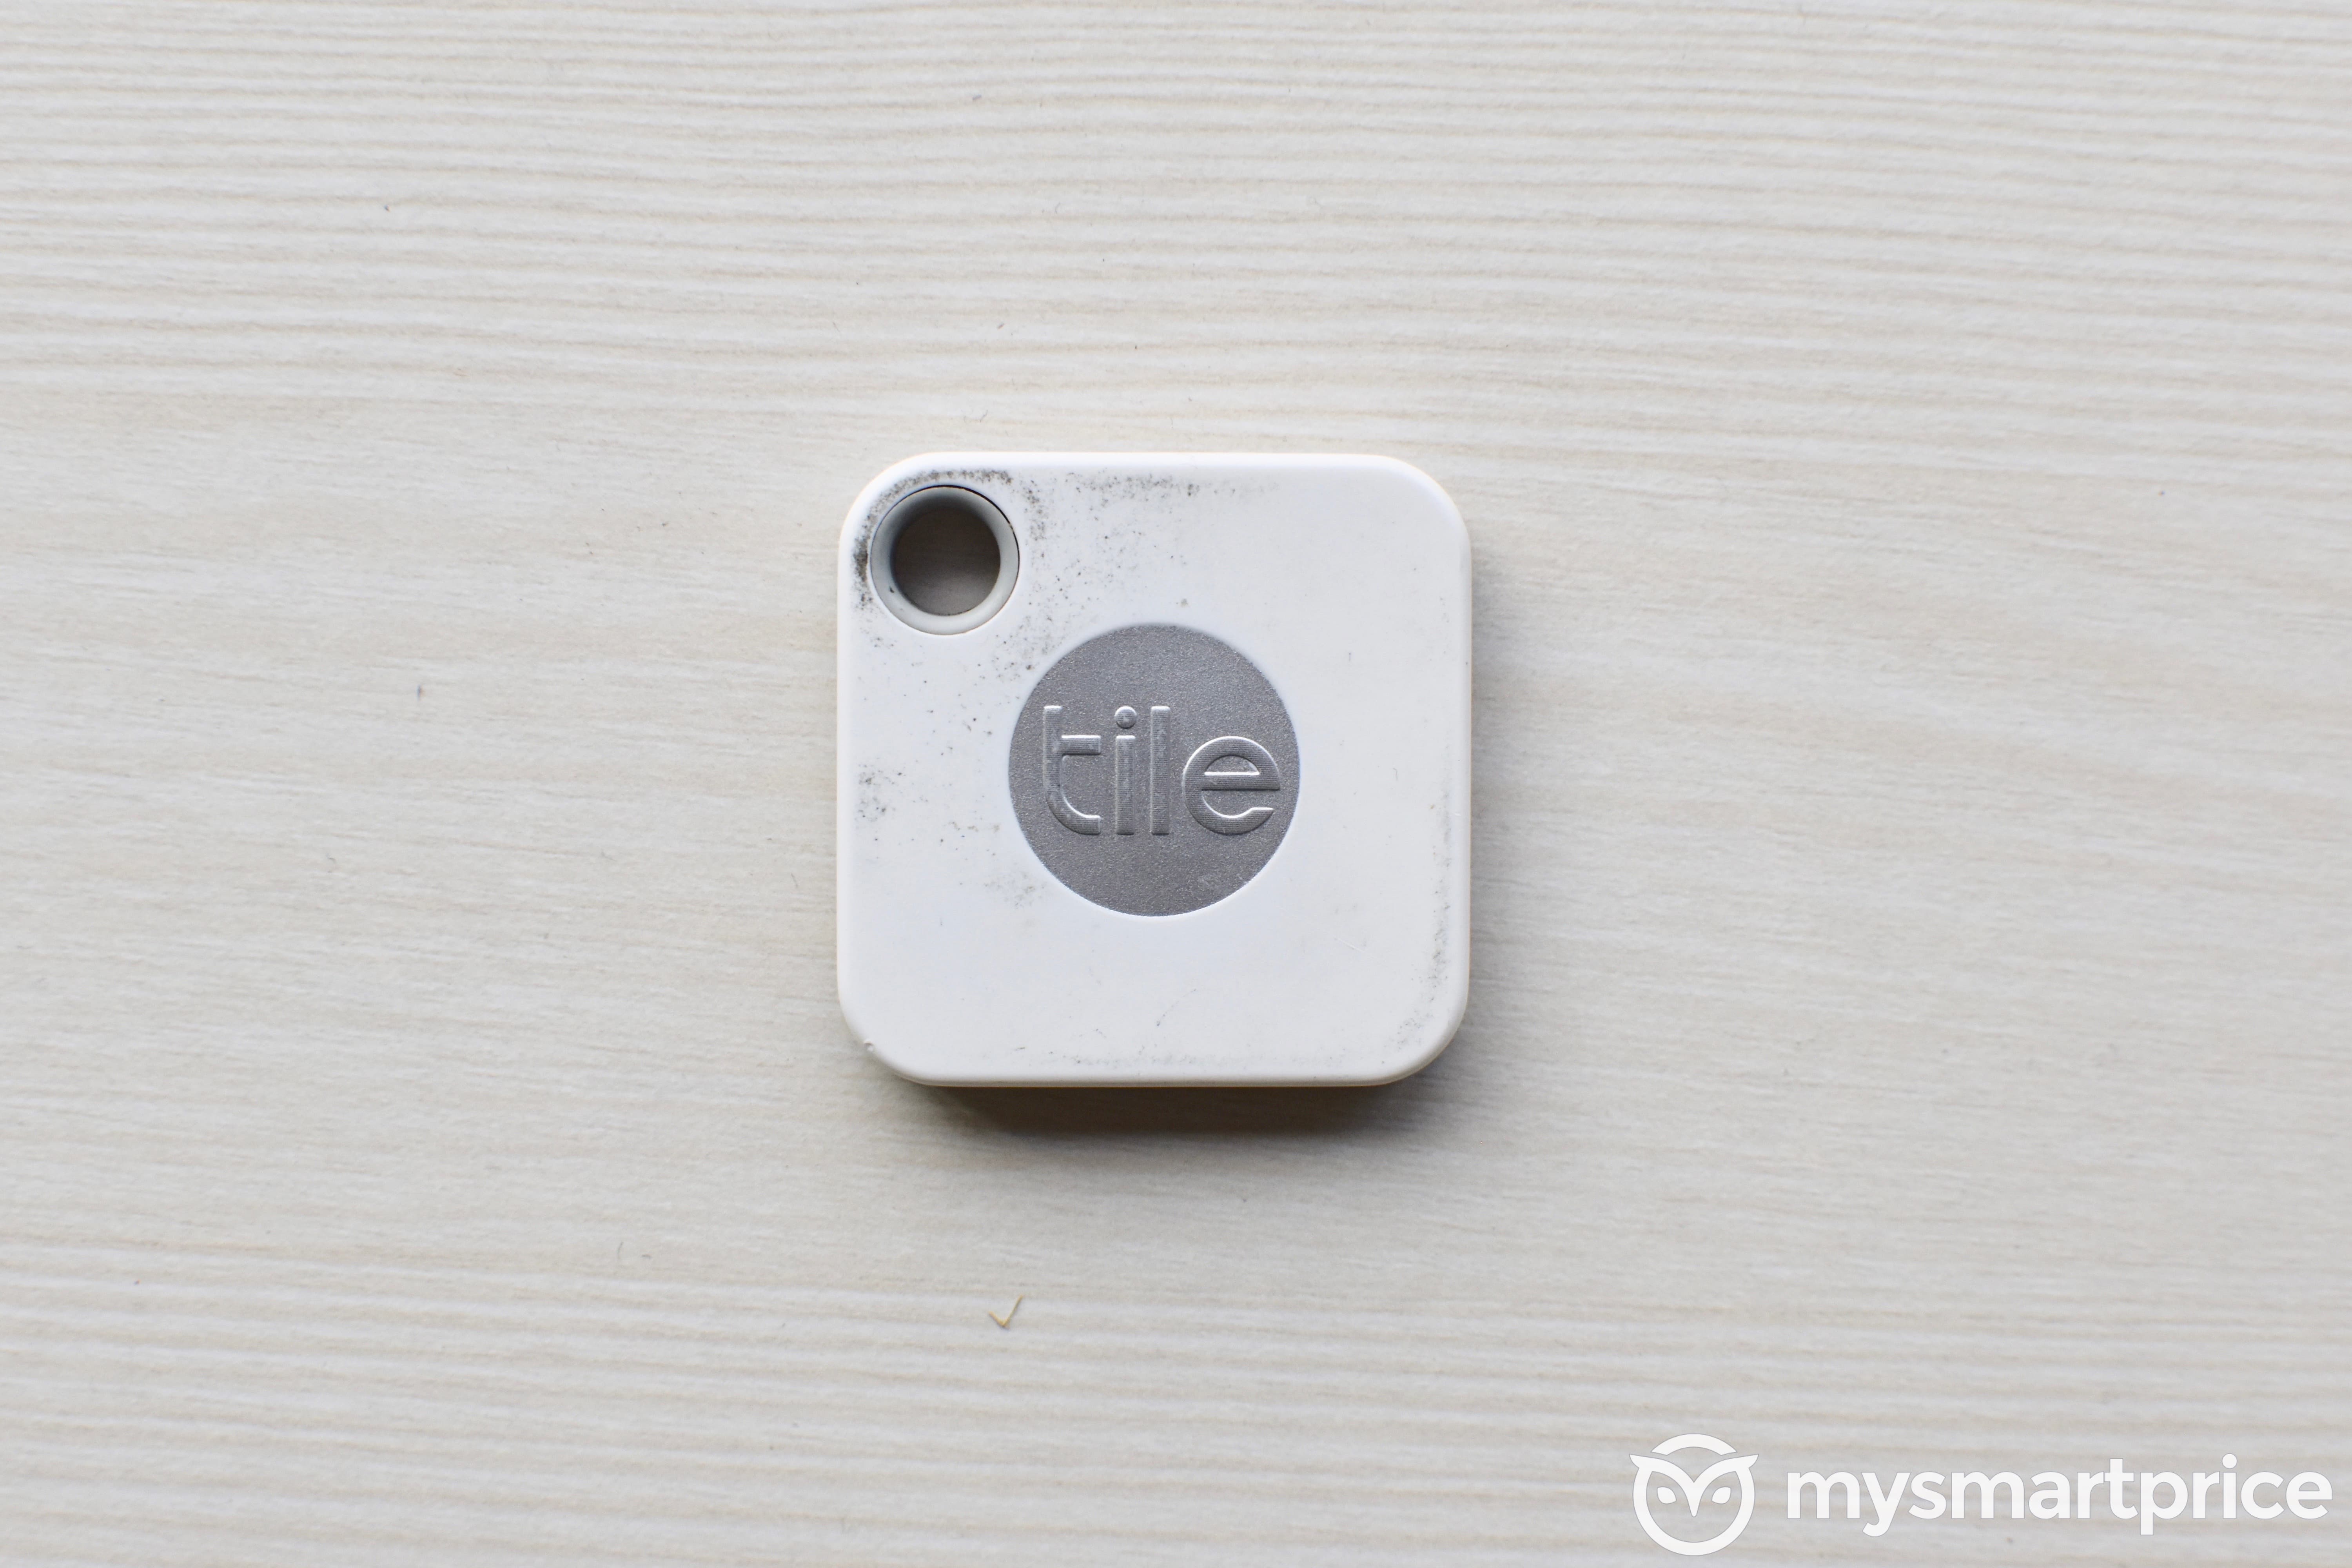 Tile Mate Bluetooth Tracker Review Is It Worth Buying Mysmartprice